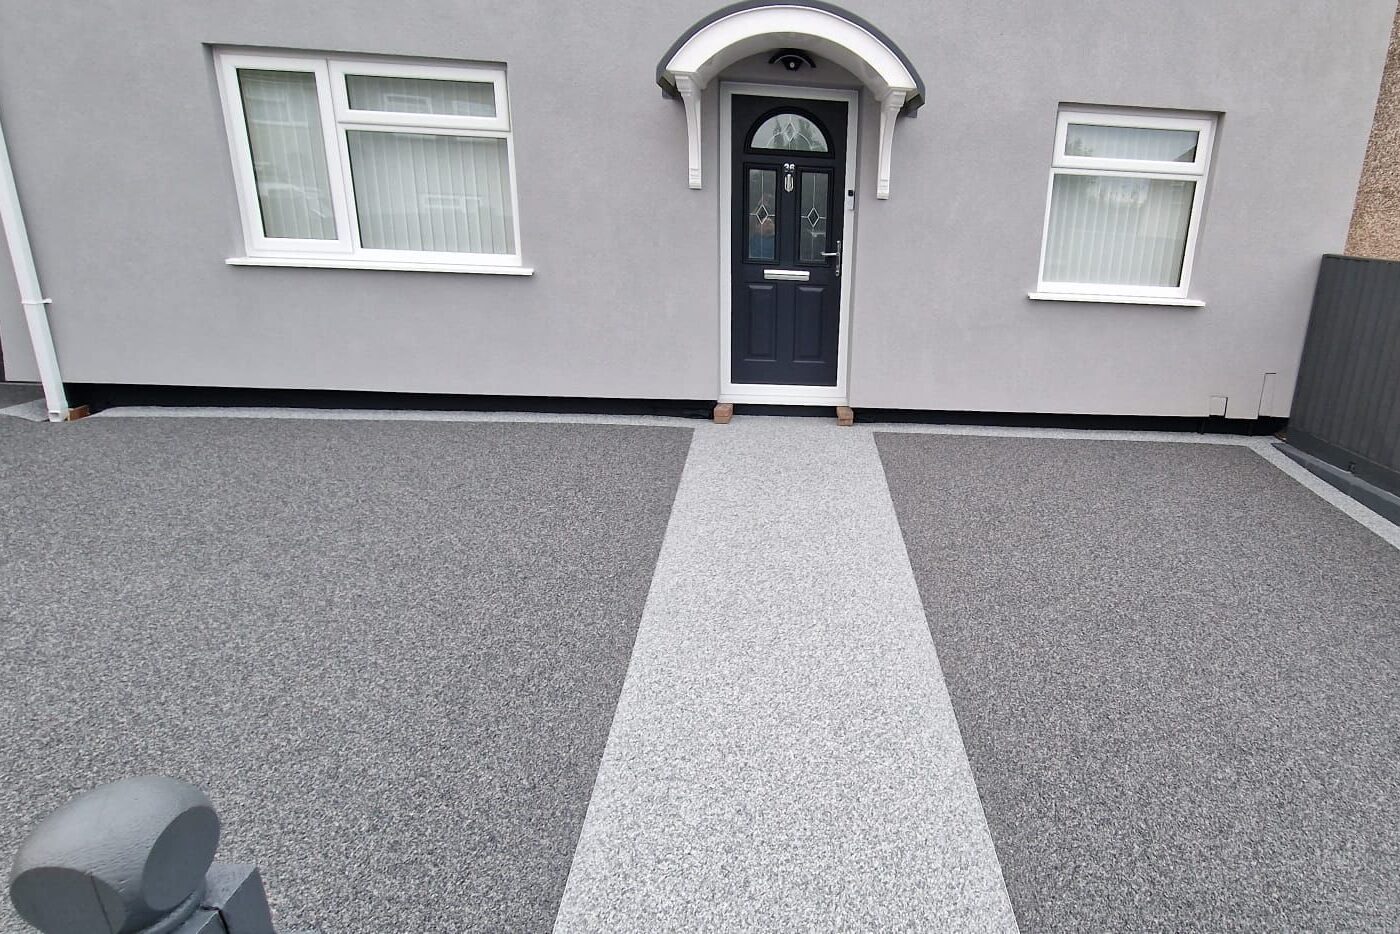 This is a photo of a new Resin bound driveway carried out in a city of Newport. All works done by Resin Driveways Newport